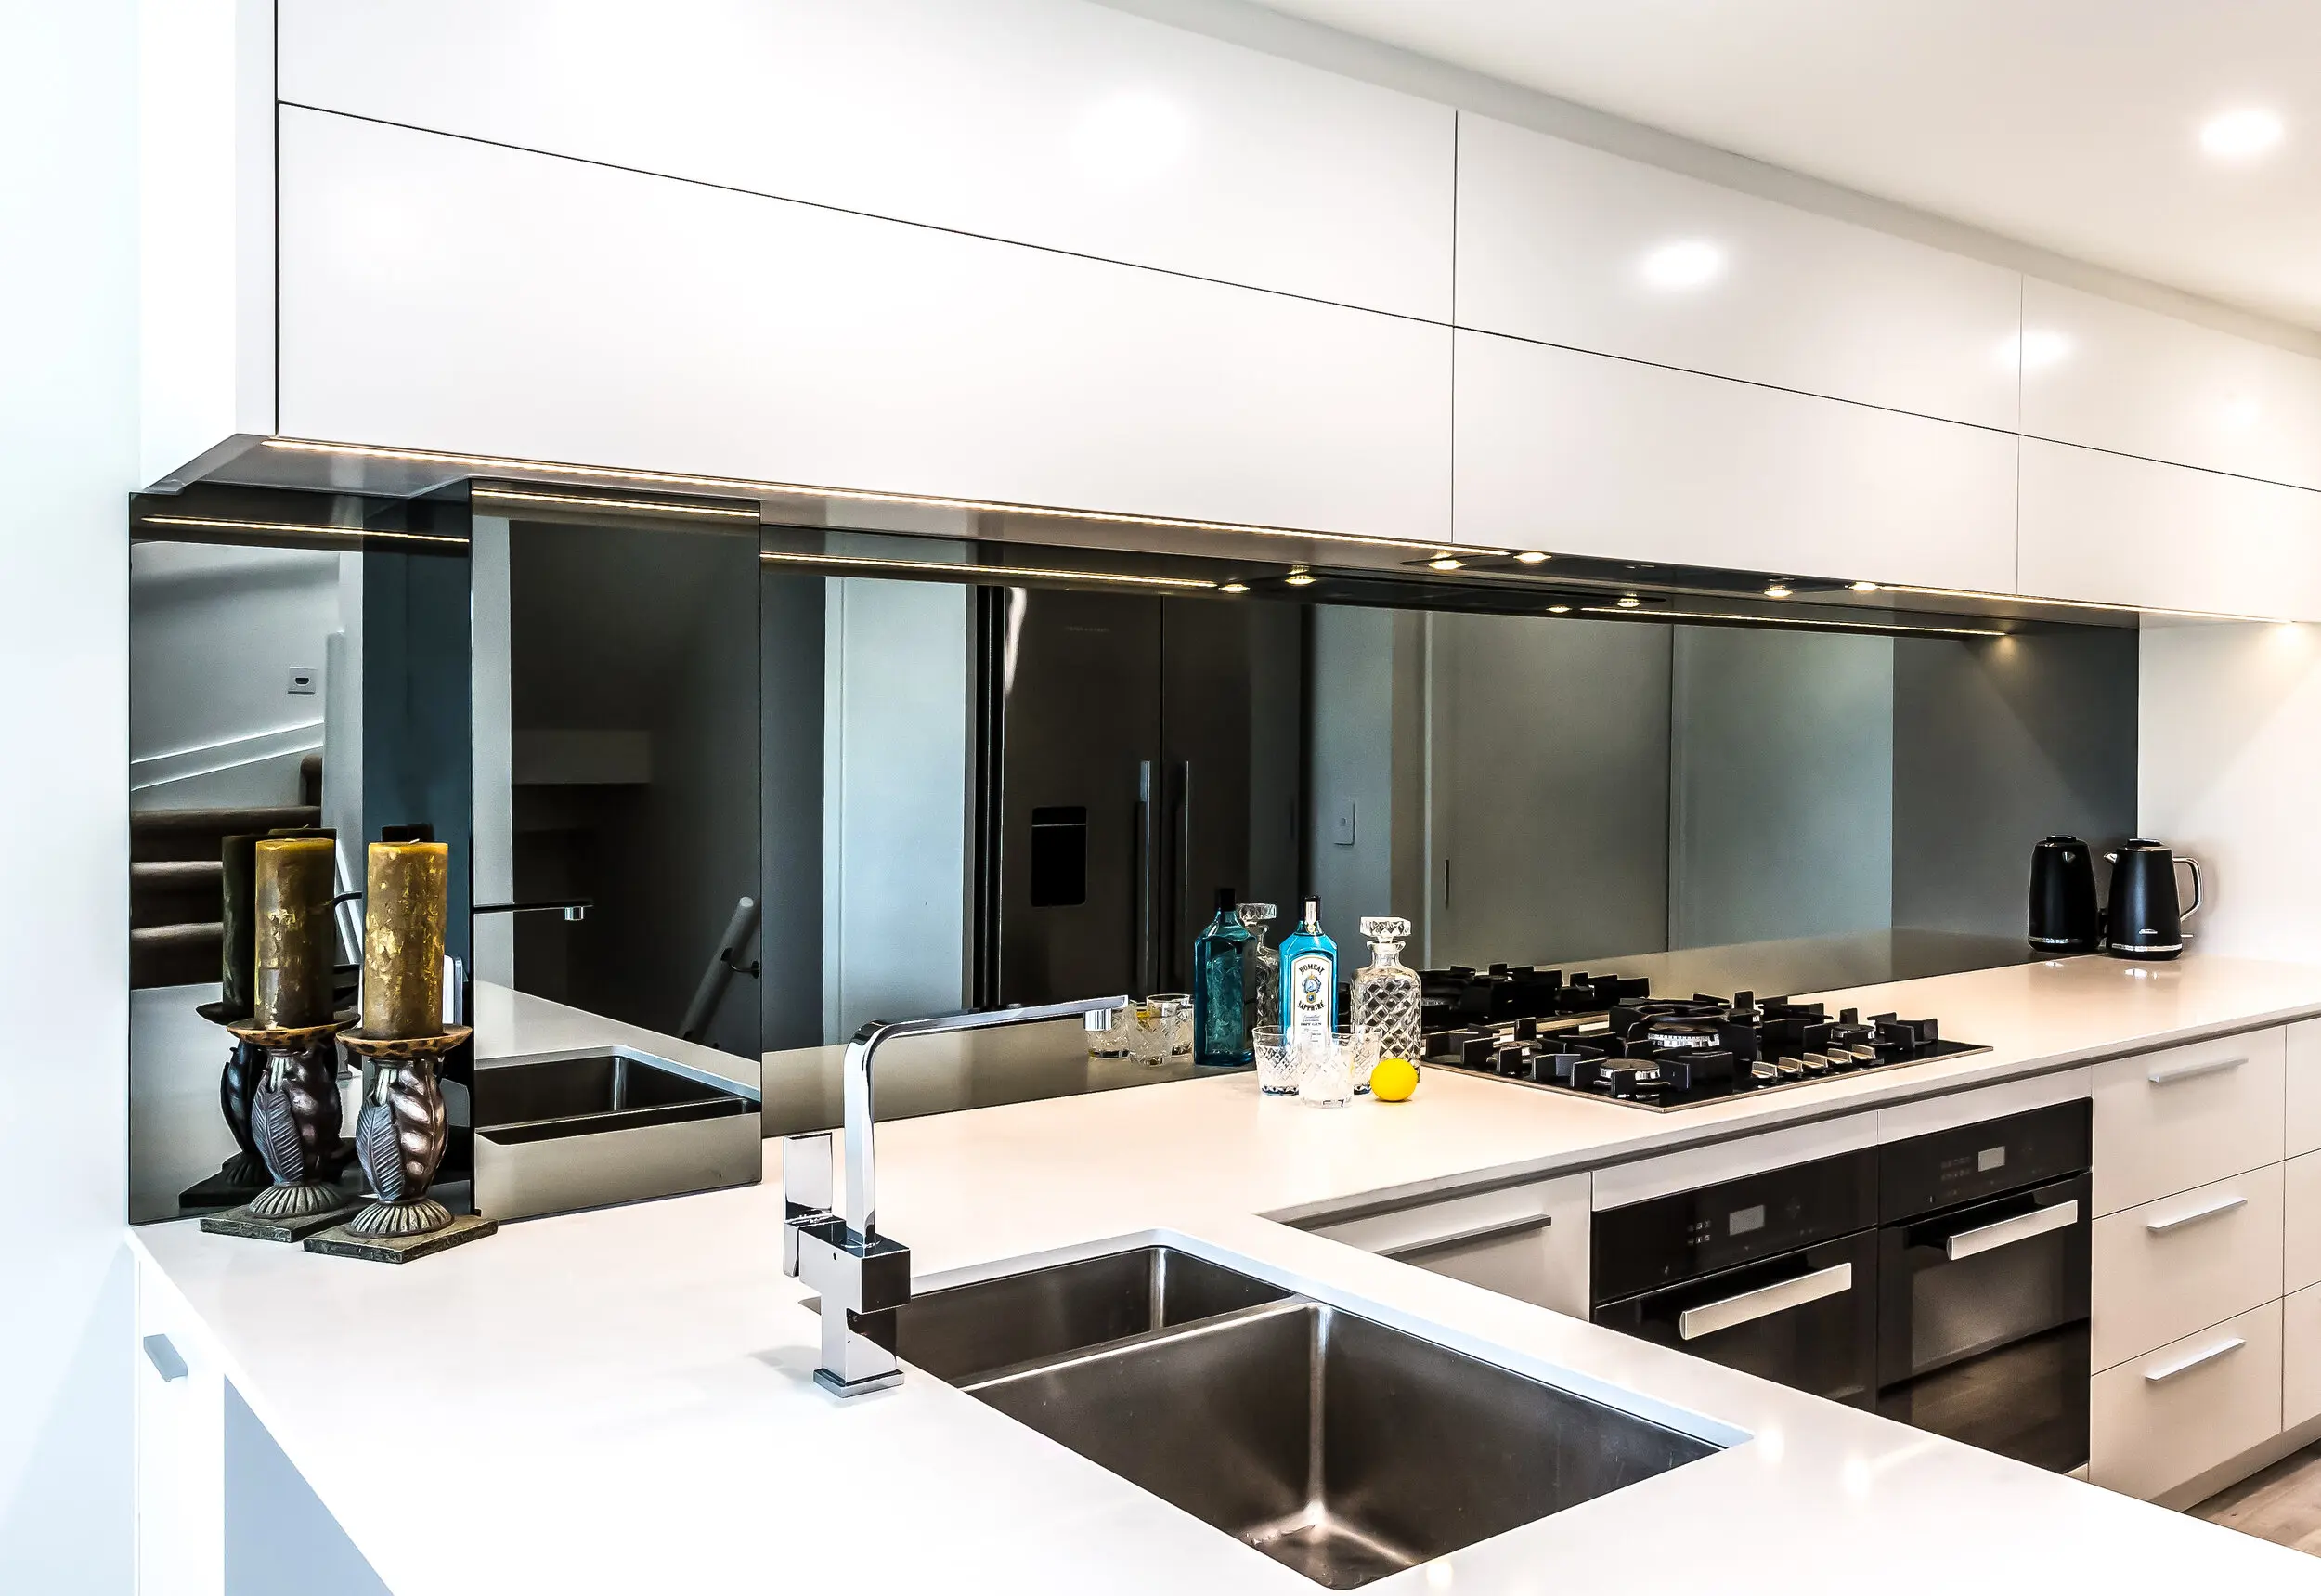 smoked mirror splashback - Can a mirror be used as a splashback